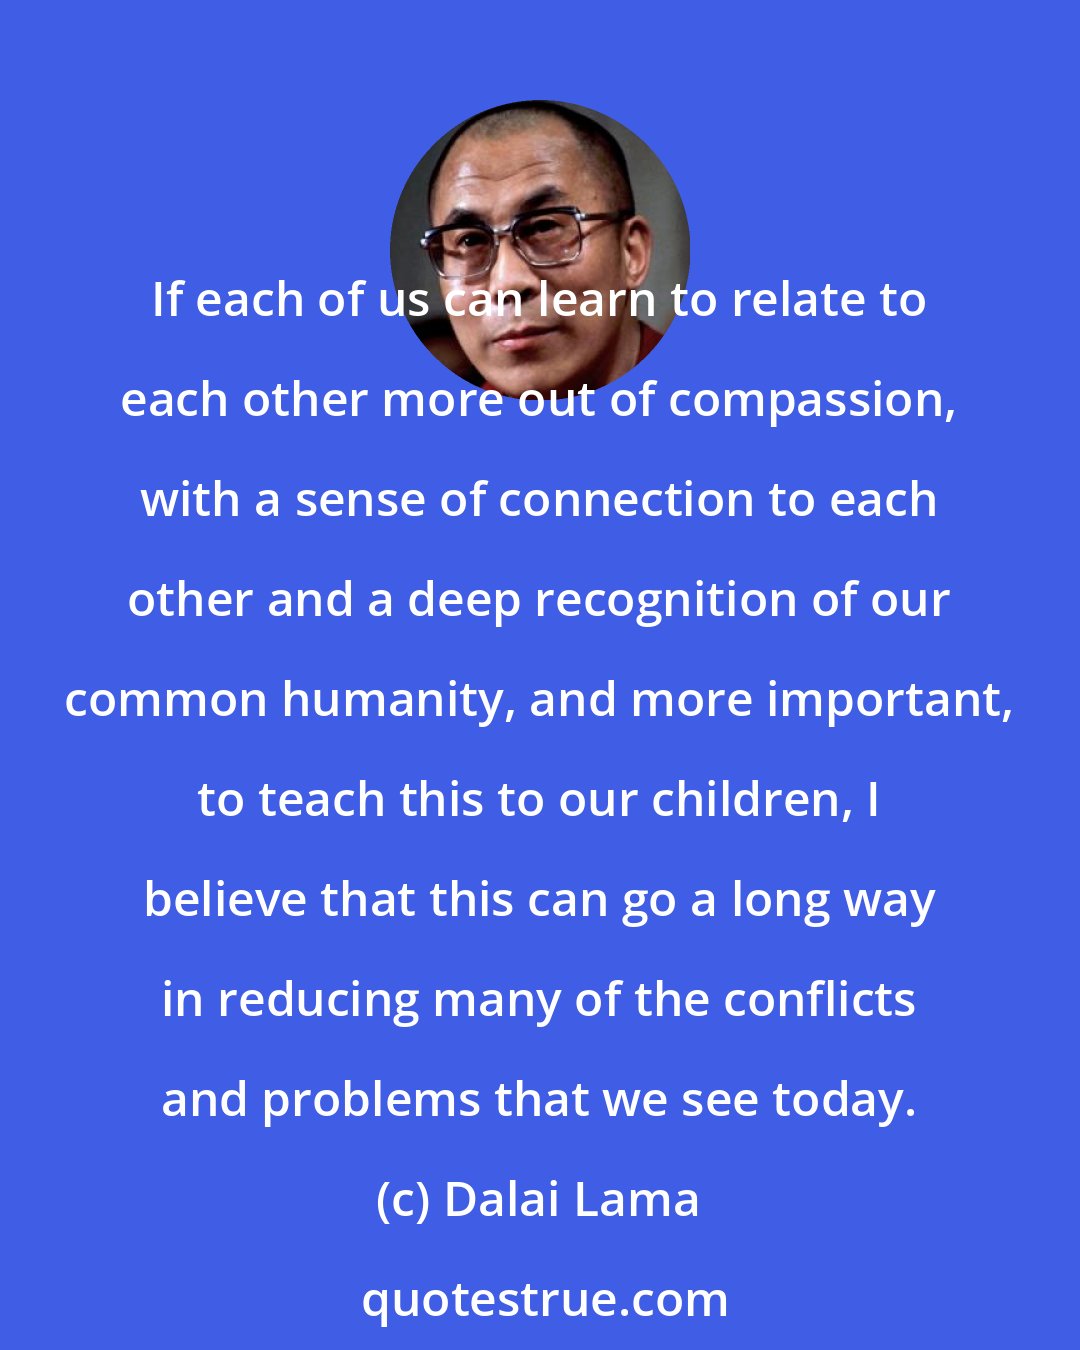 Dalai Lama: If each of us can learn to relate to each other more out of compassion, with a sense of connection to each other and a deep recognition of our common humanity, and more important, to teach this to our children, I believe that this can go a long way in reducing many of the conflicts and problems that we see today.